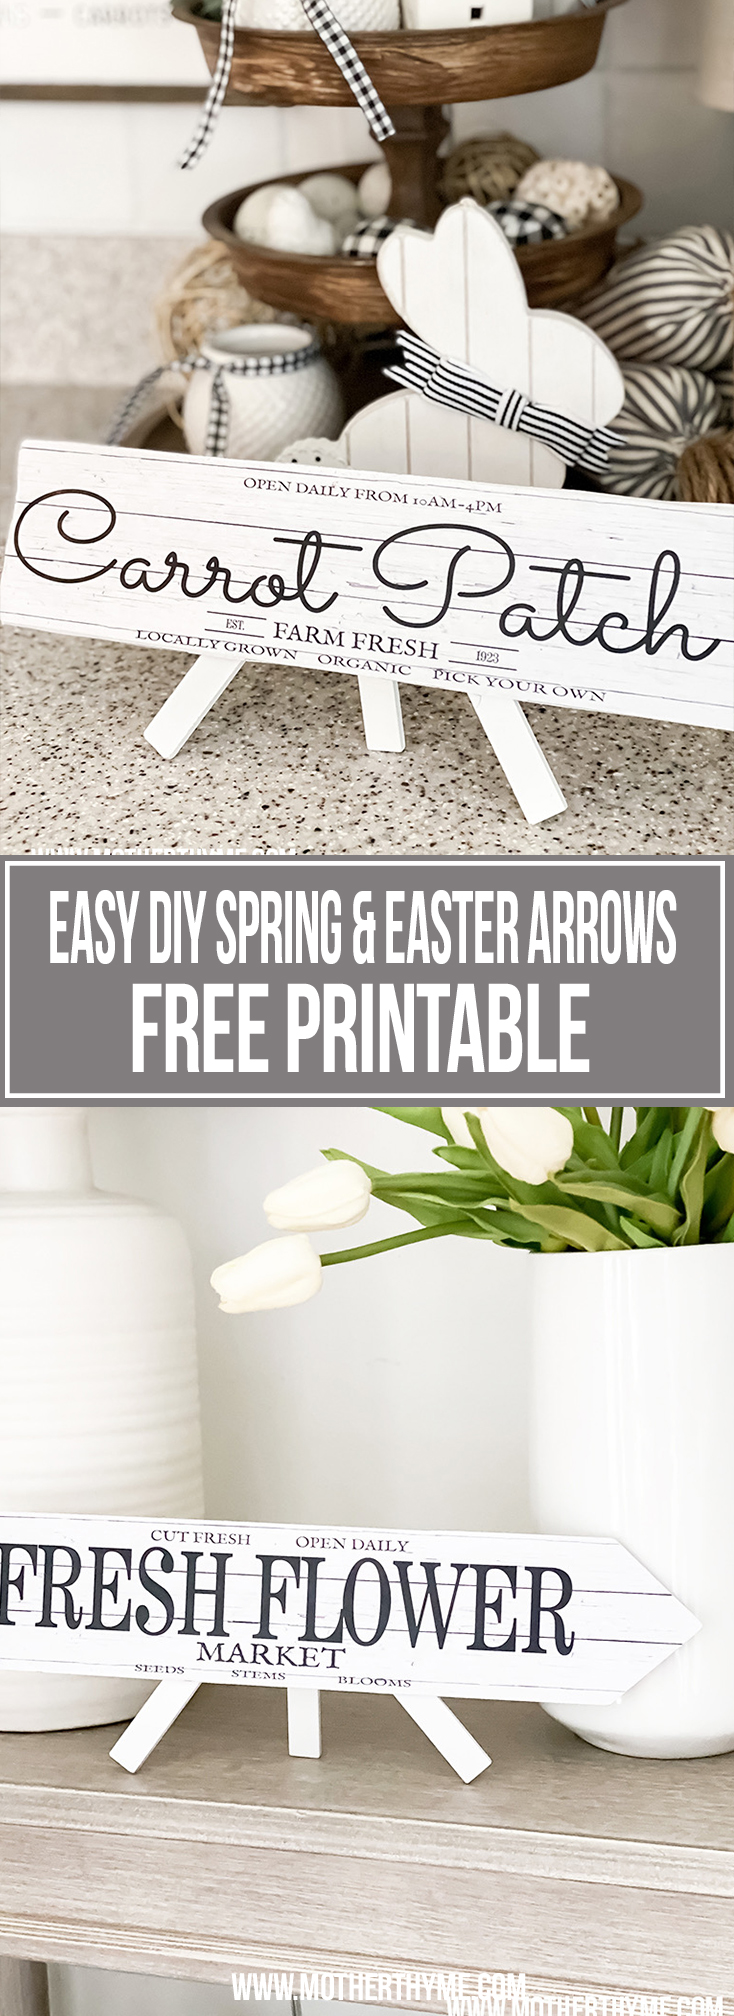 EASY DIY SPRING AND EASTER ARROWS WITH FREE PRINTABLES